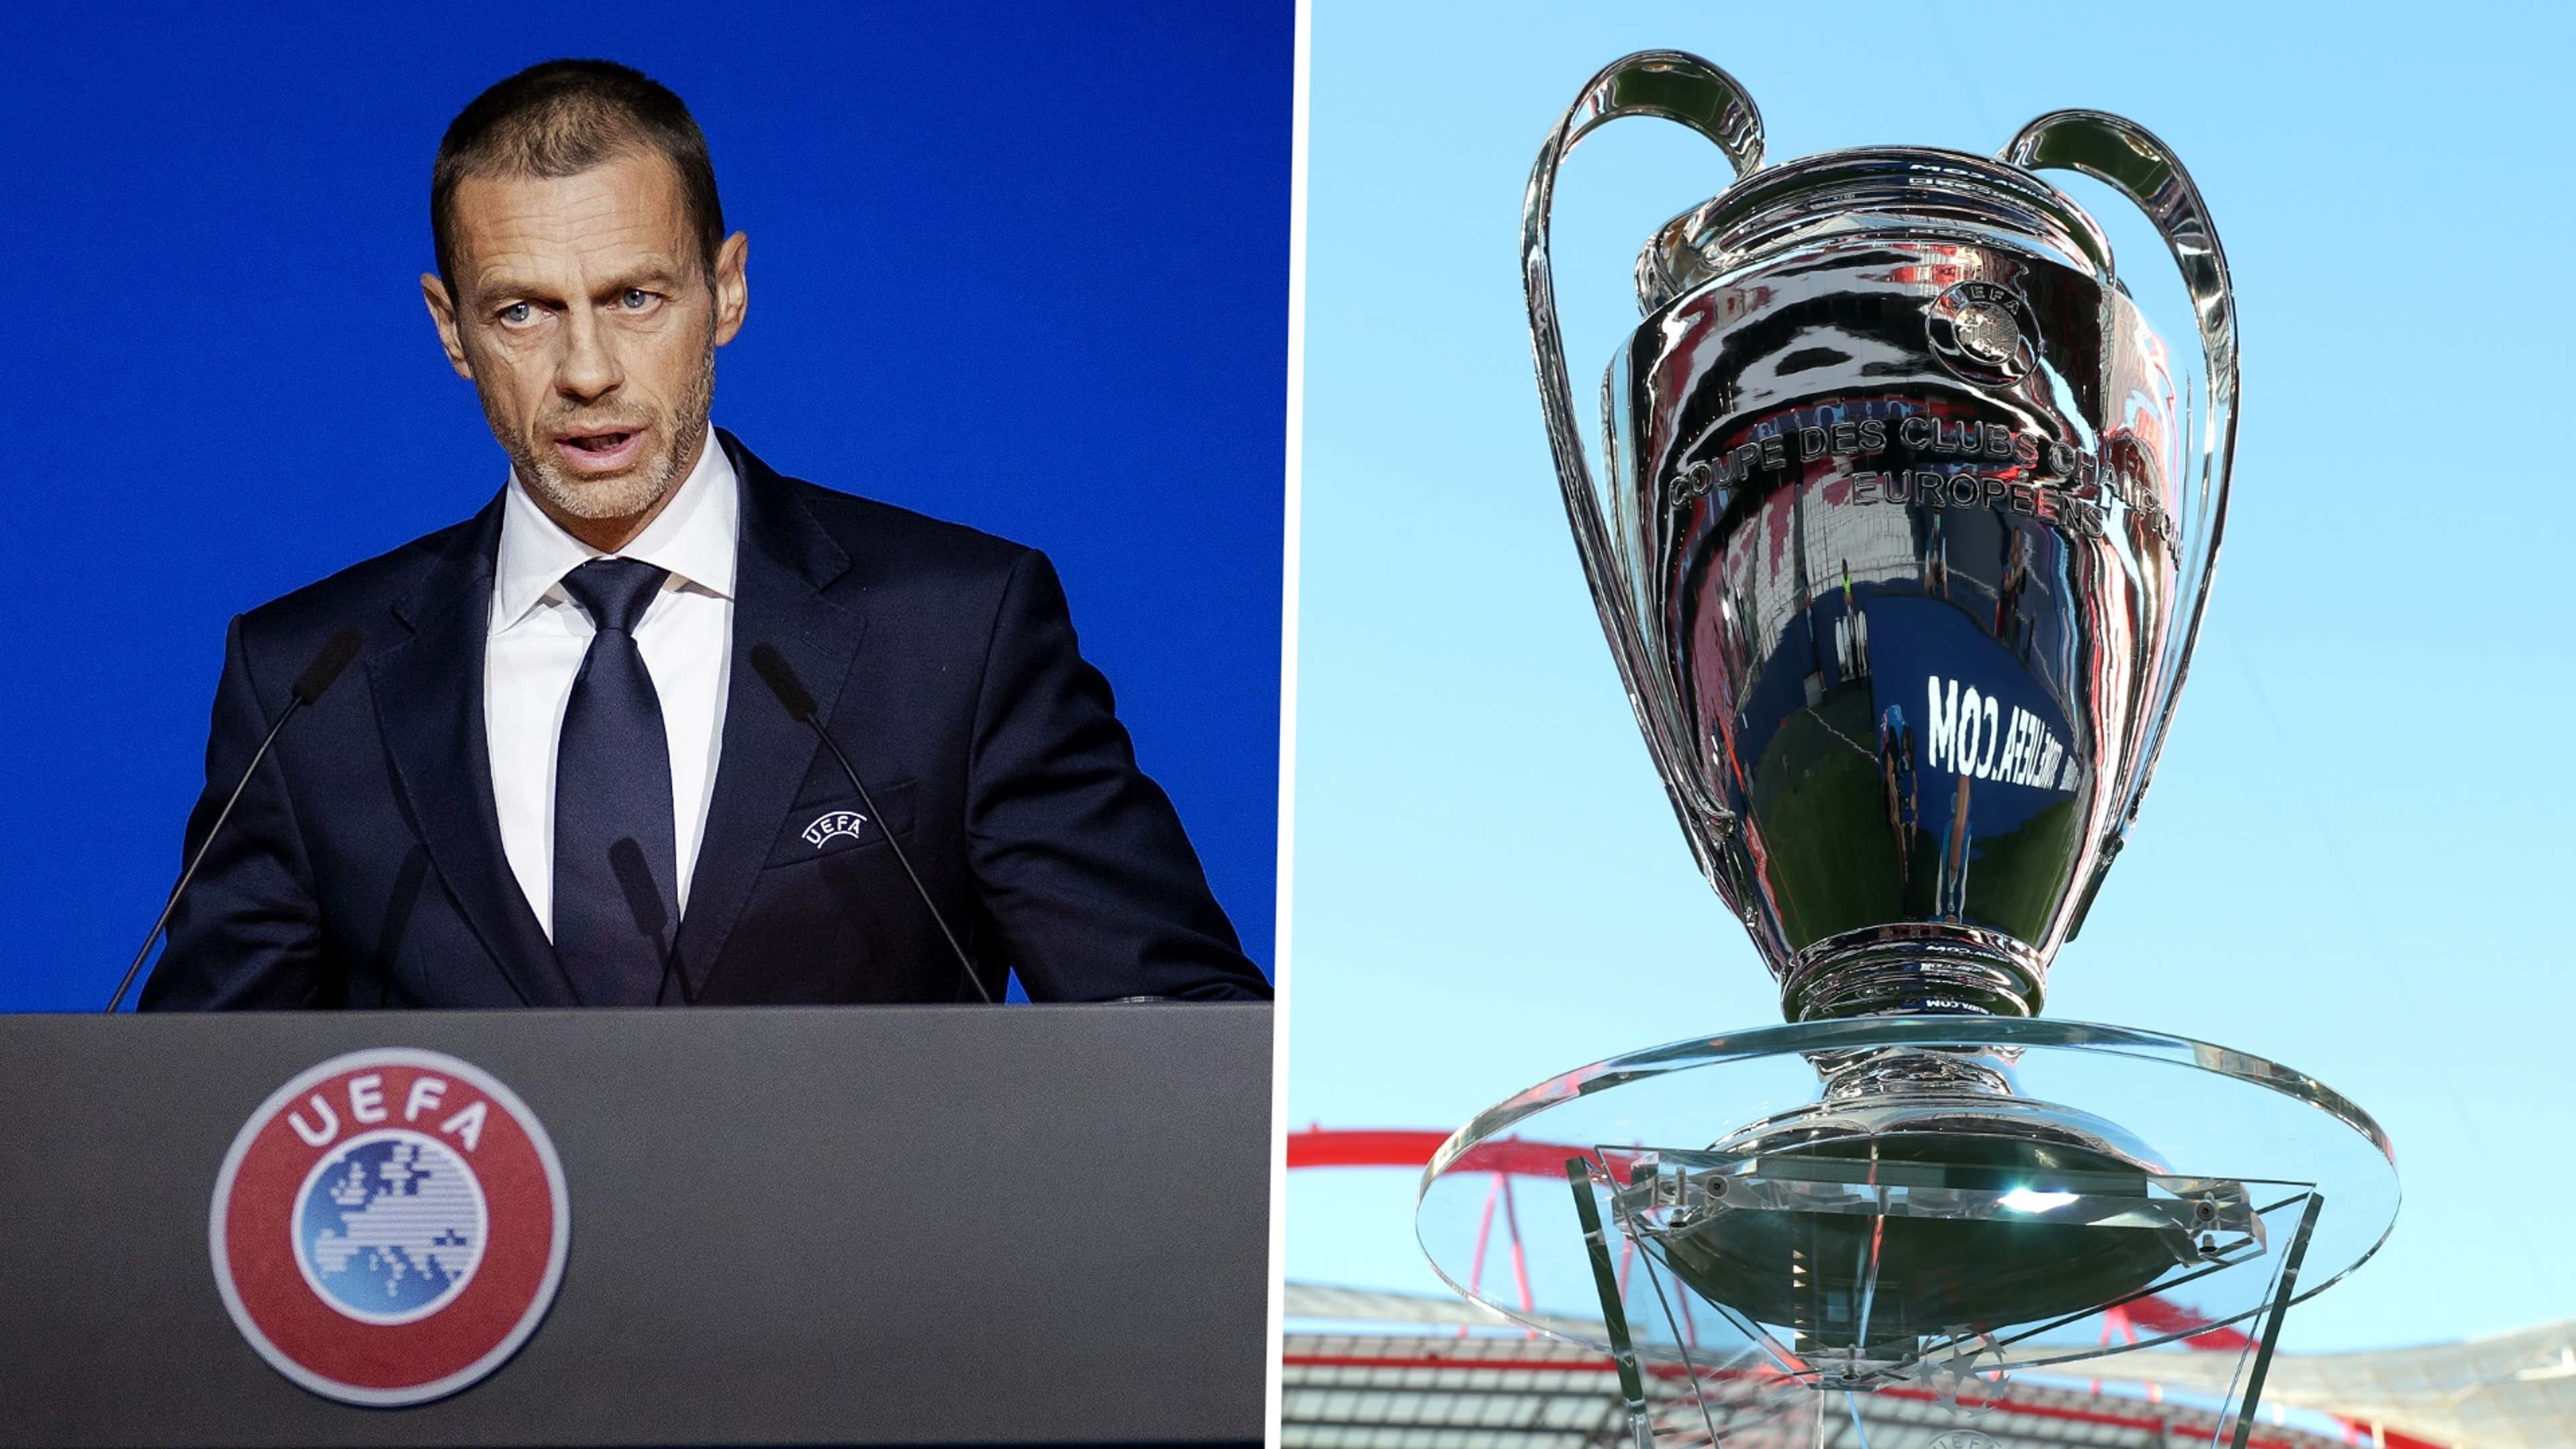 New UEFA Champions League Format Explained: Europe's Top Tournament Will  Look Very Different Next Season